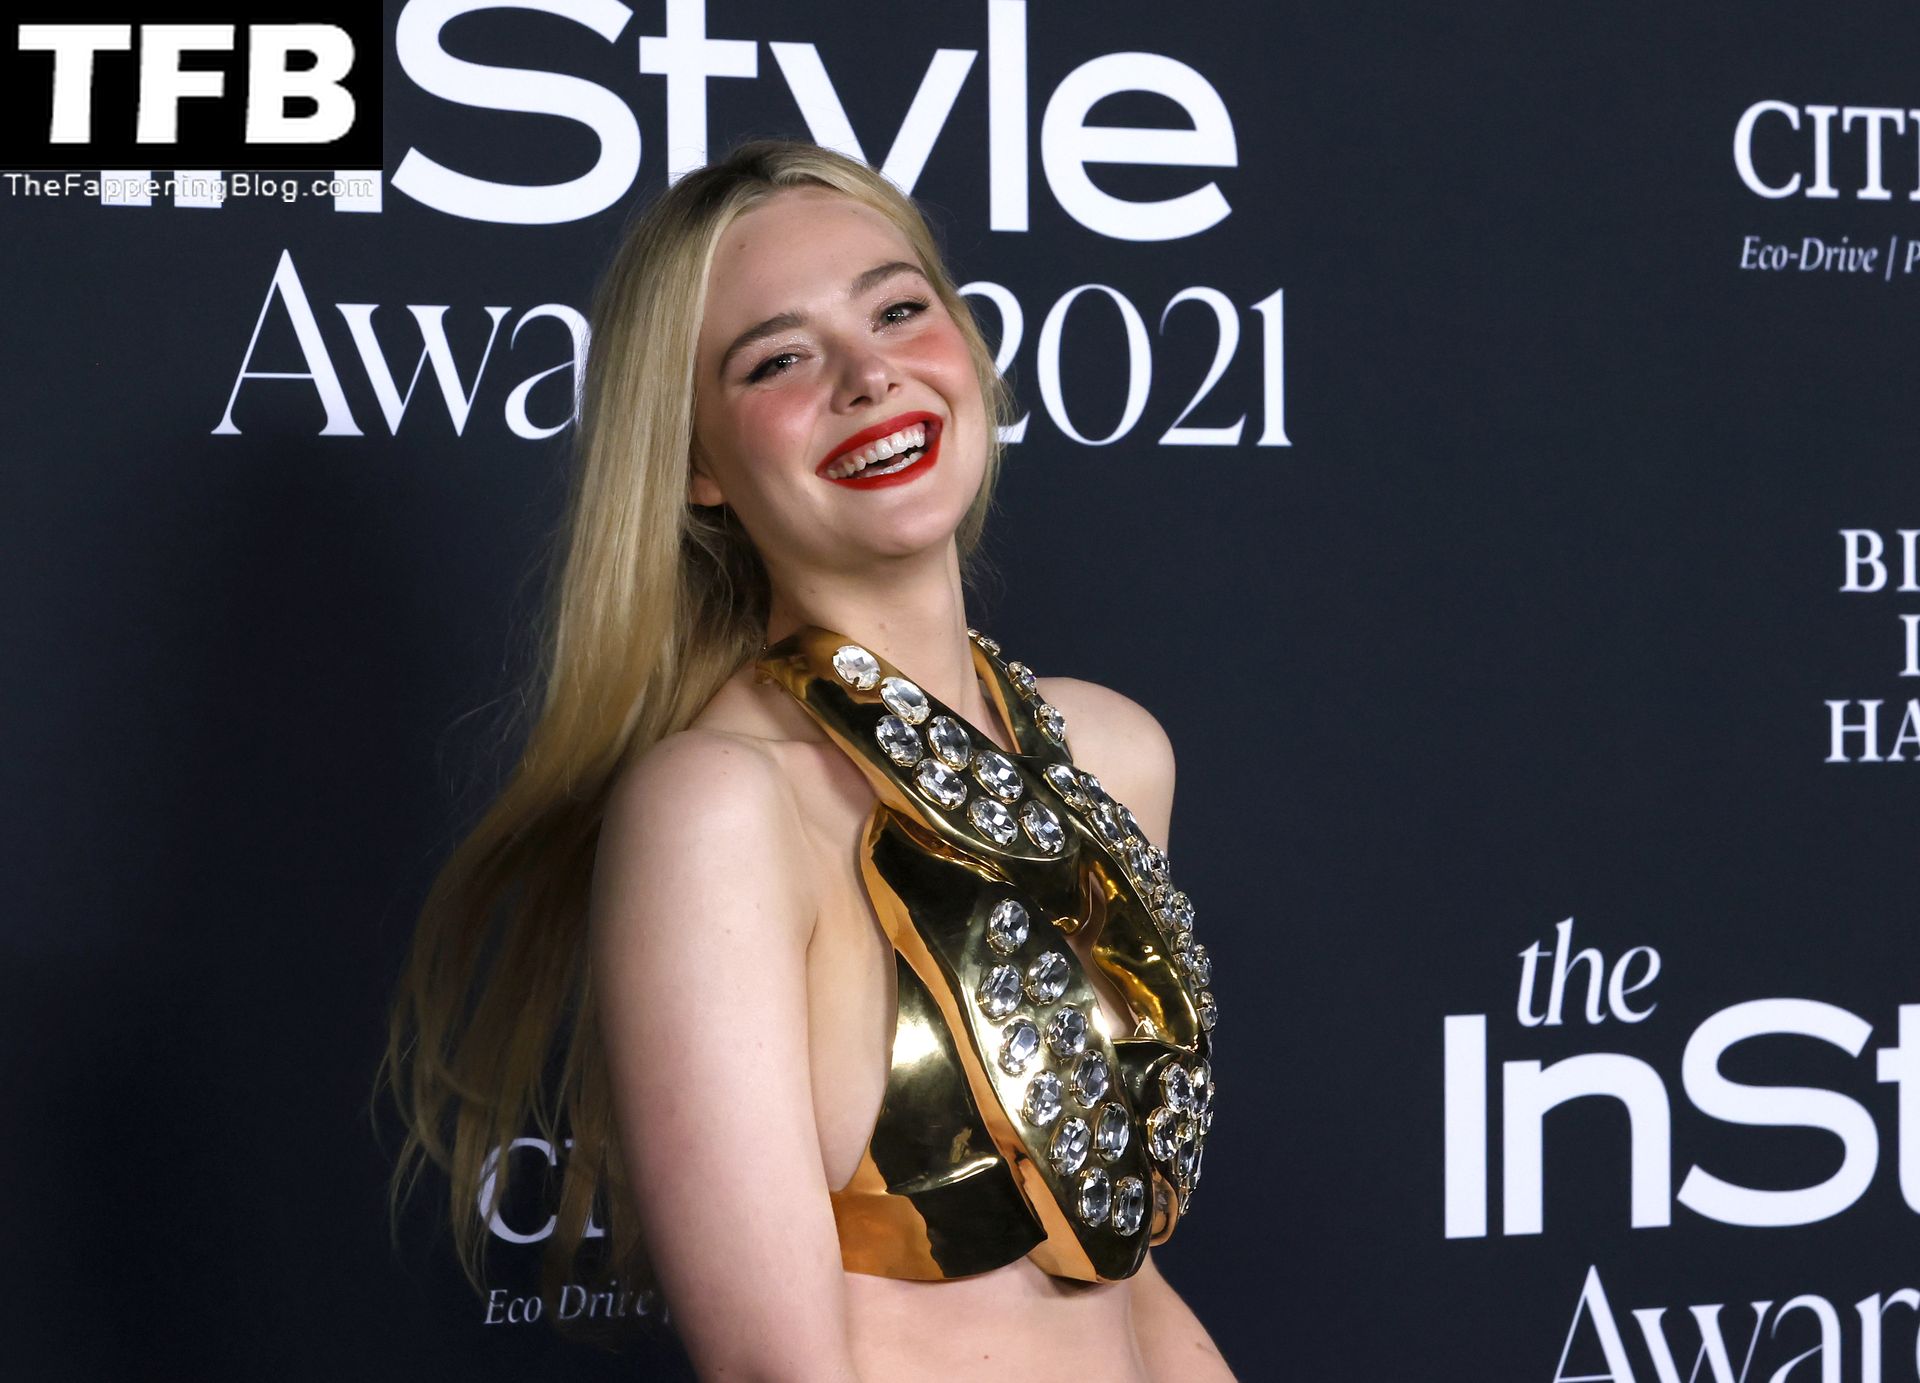 Elle-Fanning-Sexy-Braless-The-Fappening-Blog-37.jpg